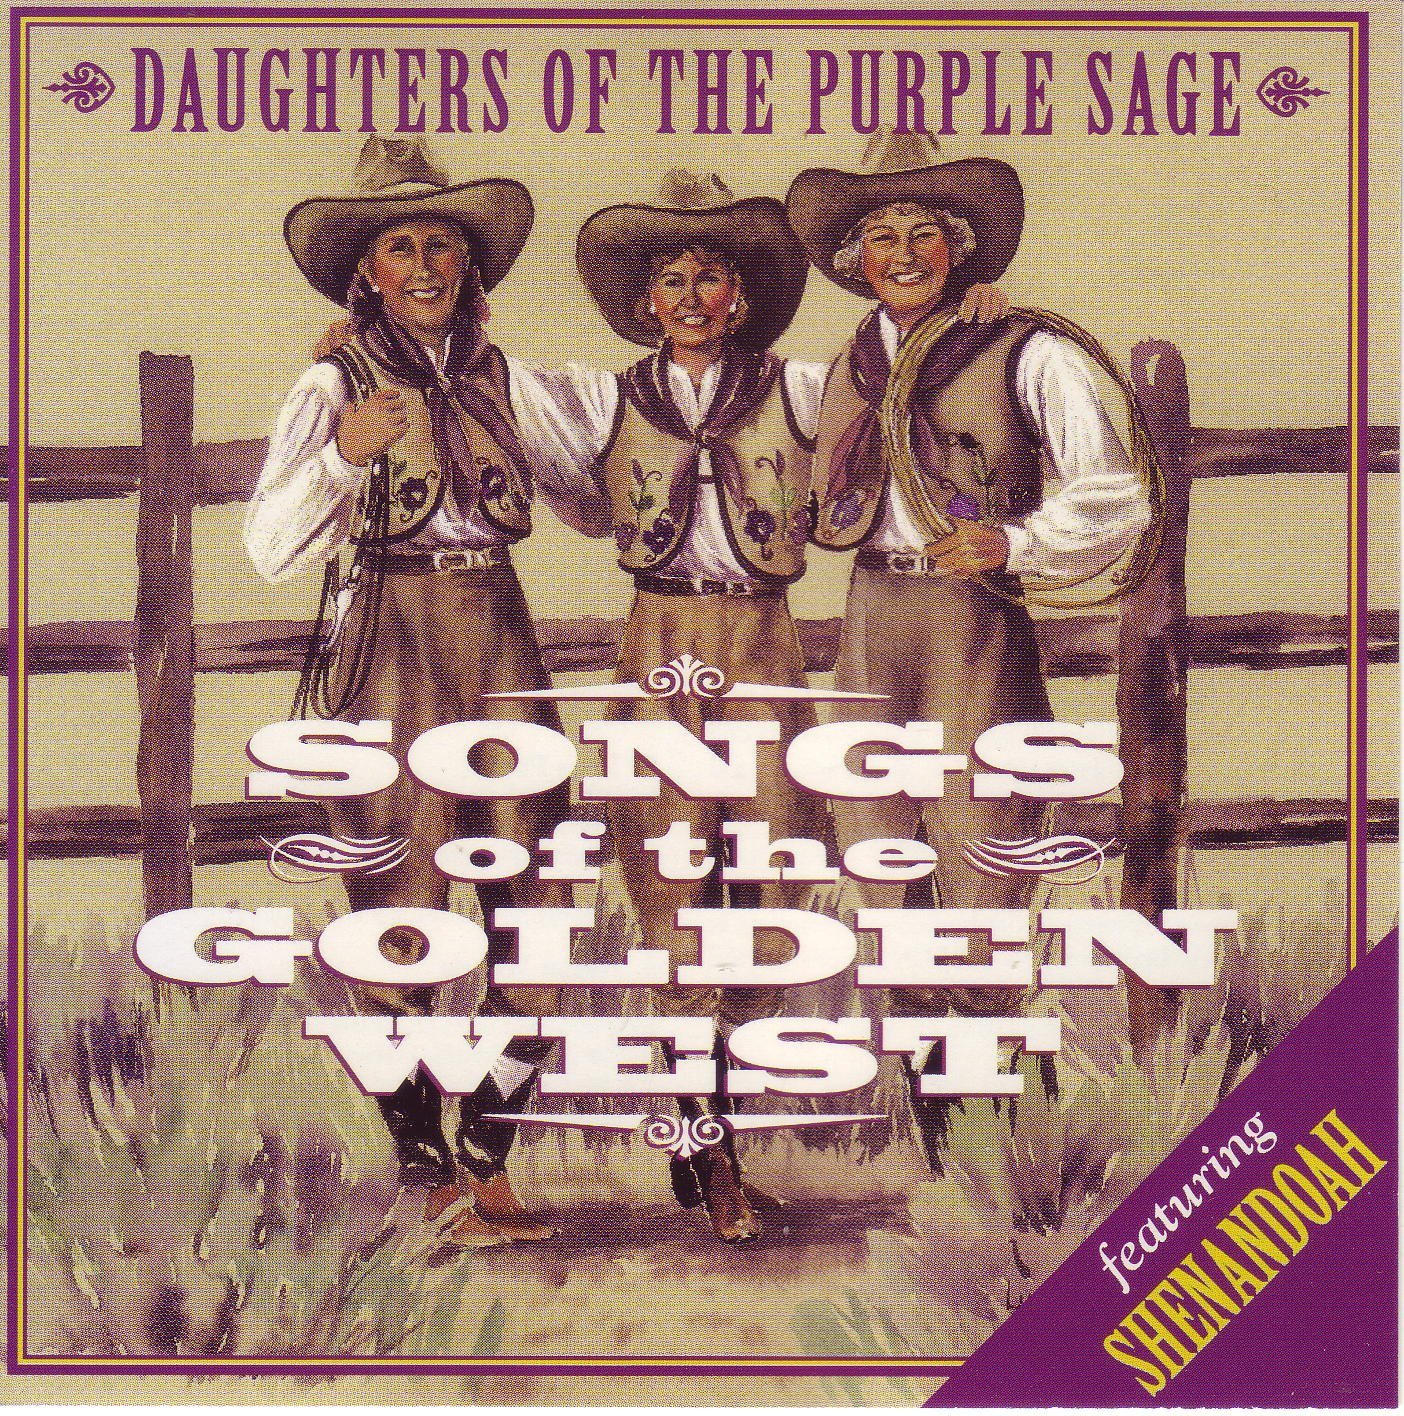 Songs of the Golden West